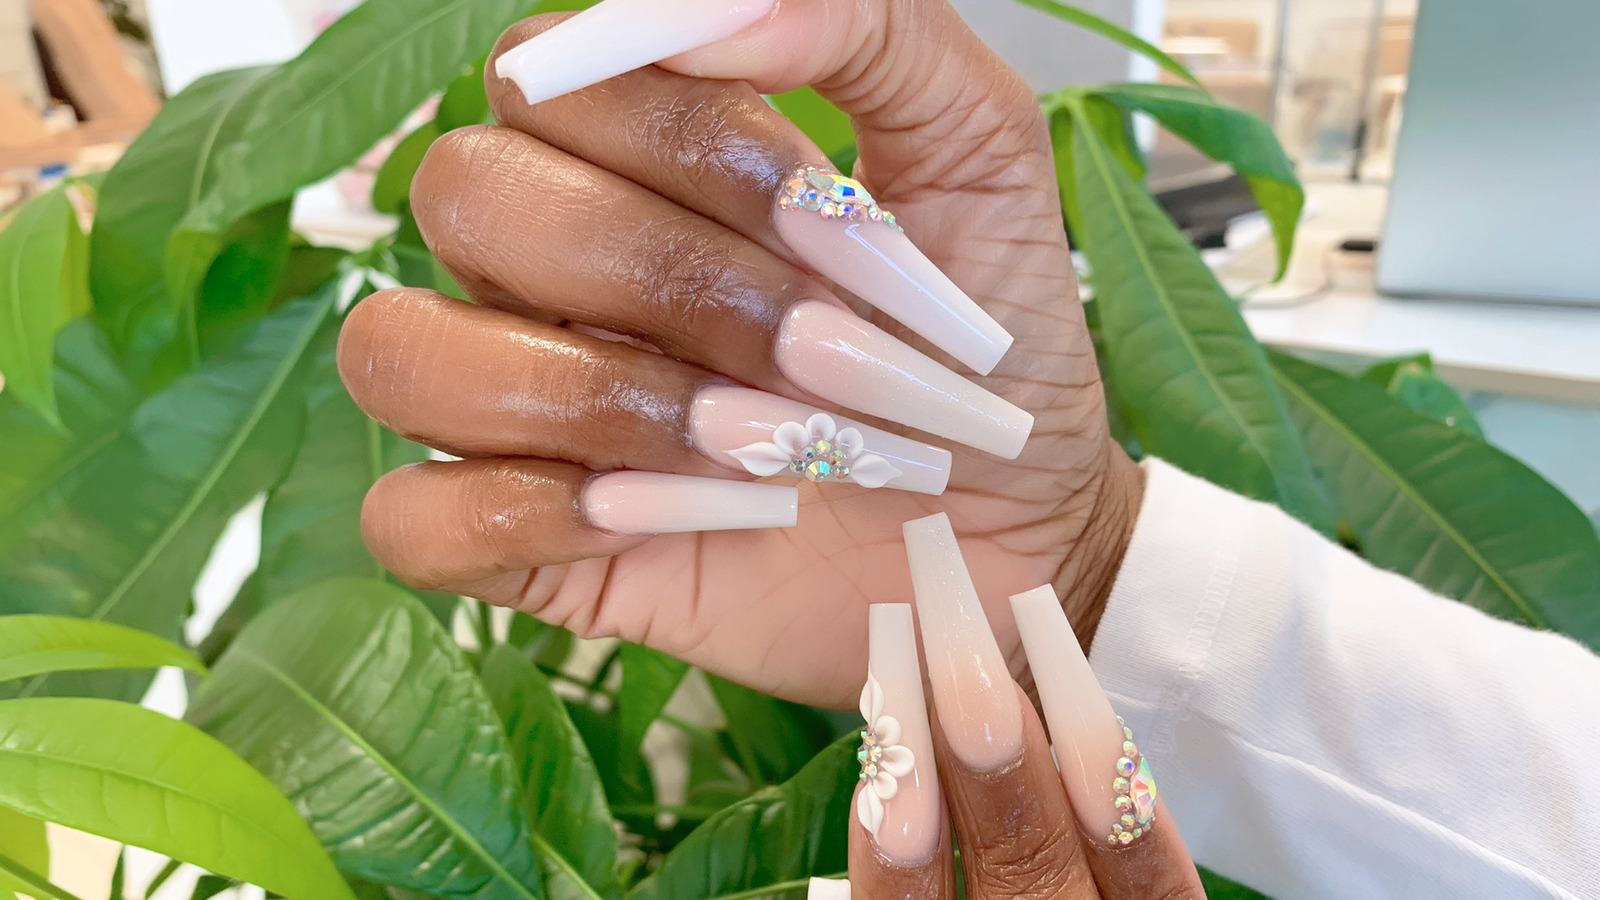 2. Stunning Coffin Nail Designs to Try Right Now - wide 2